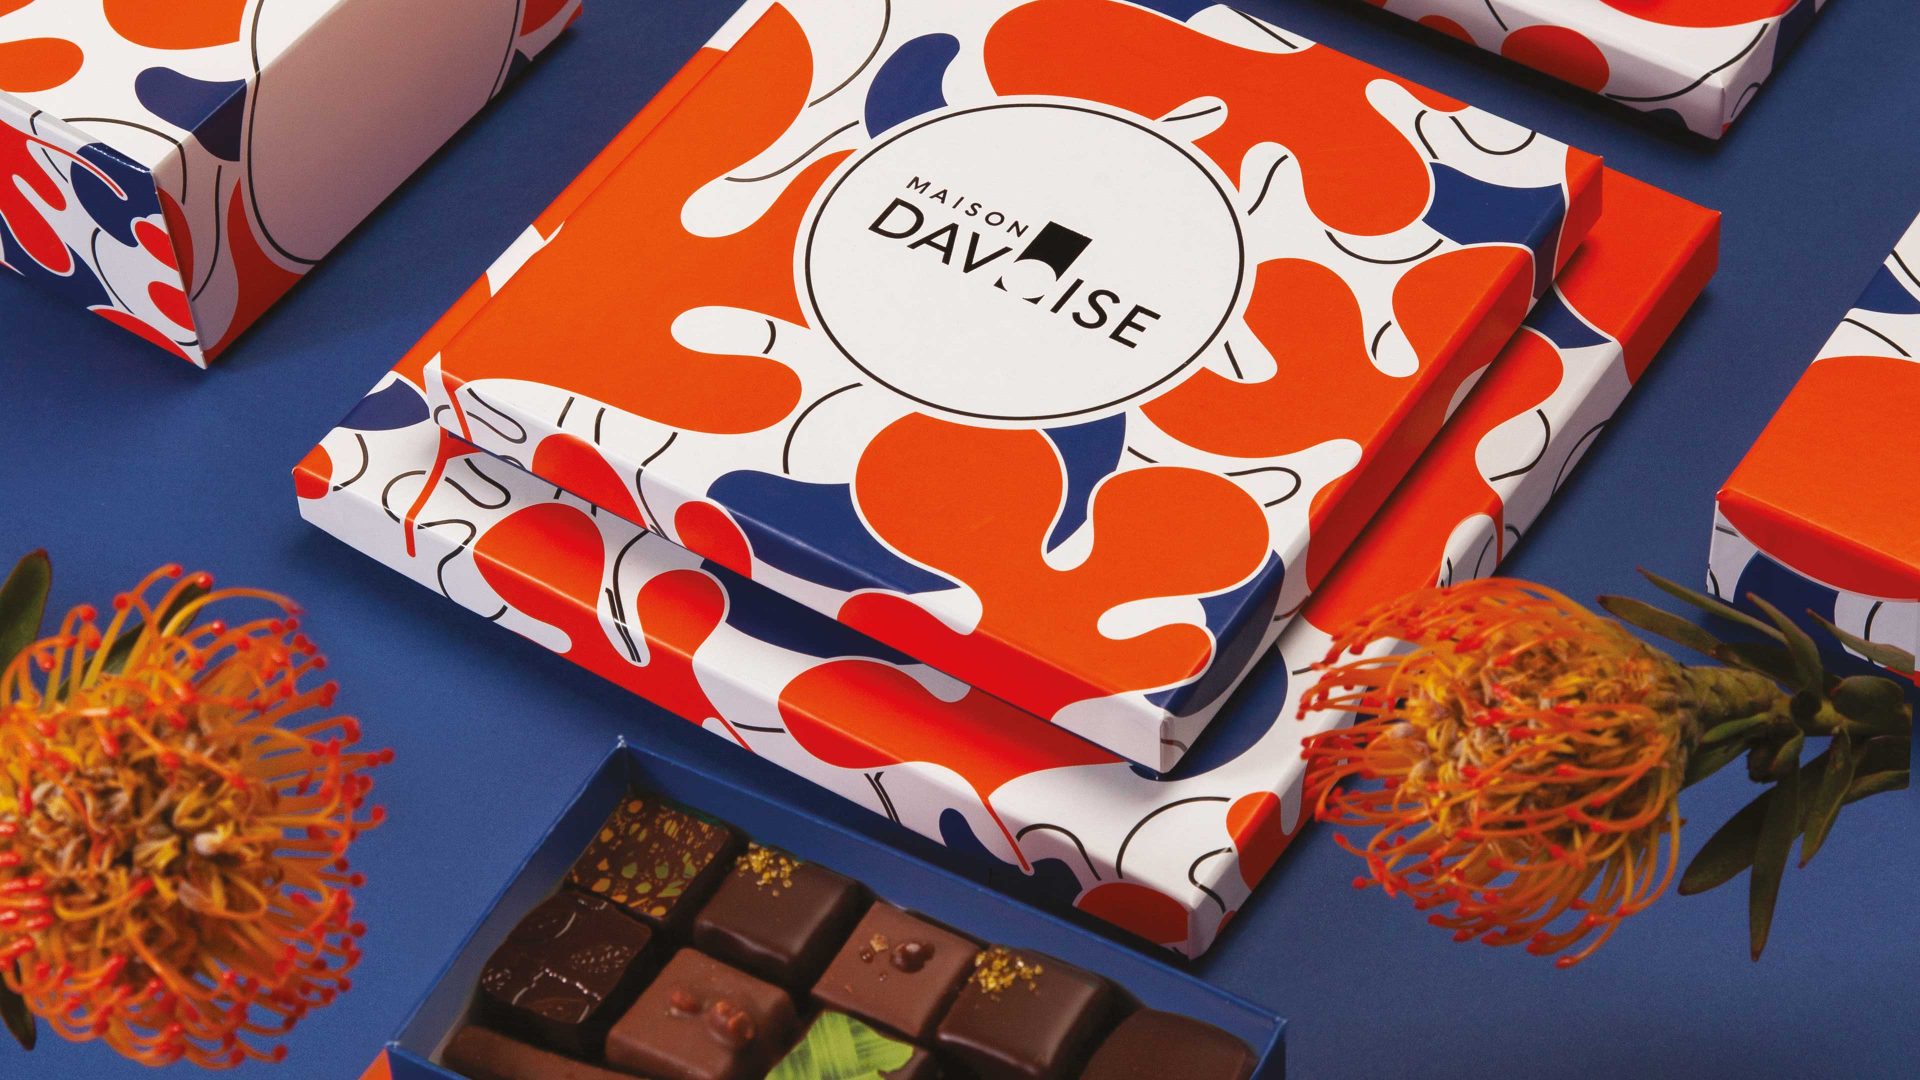 Box orange square and rectangle davoise with chocolcate